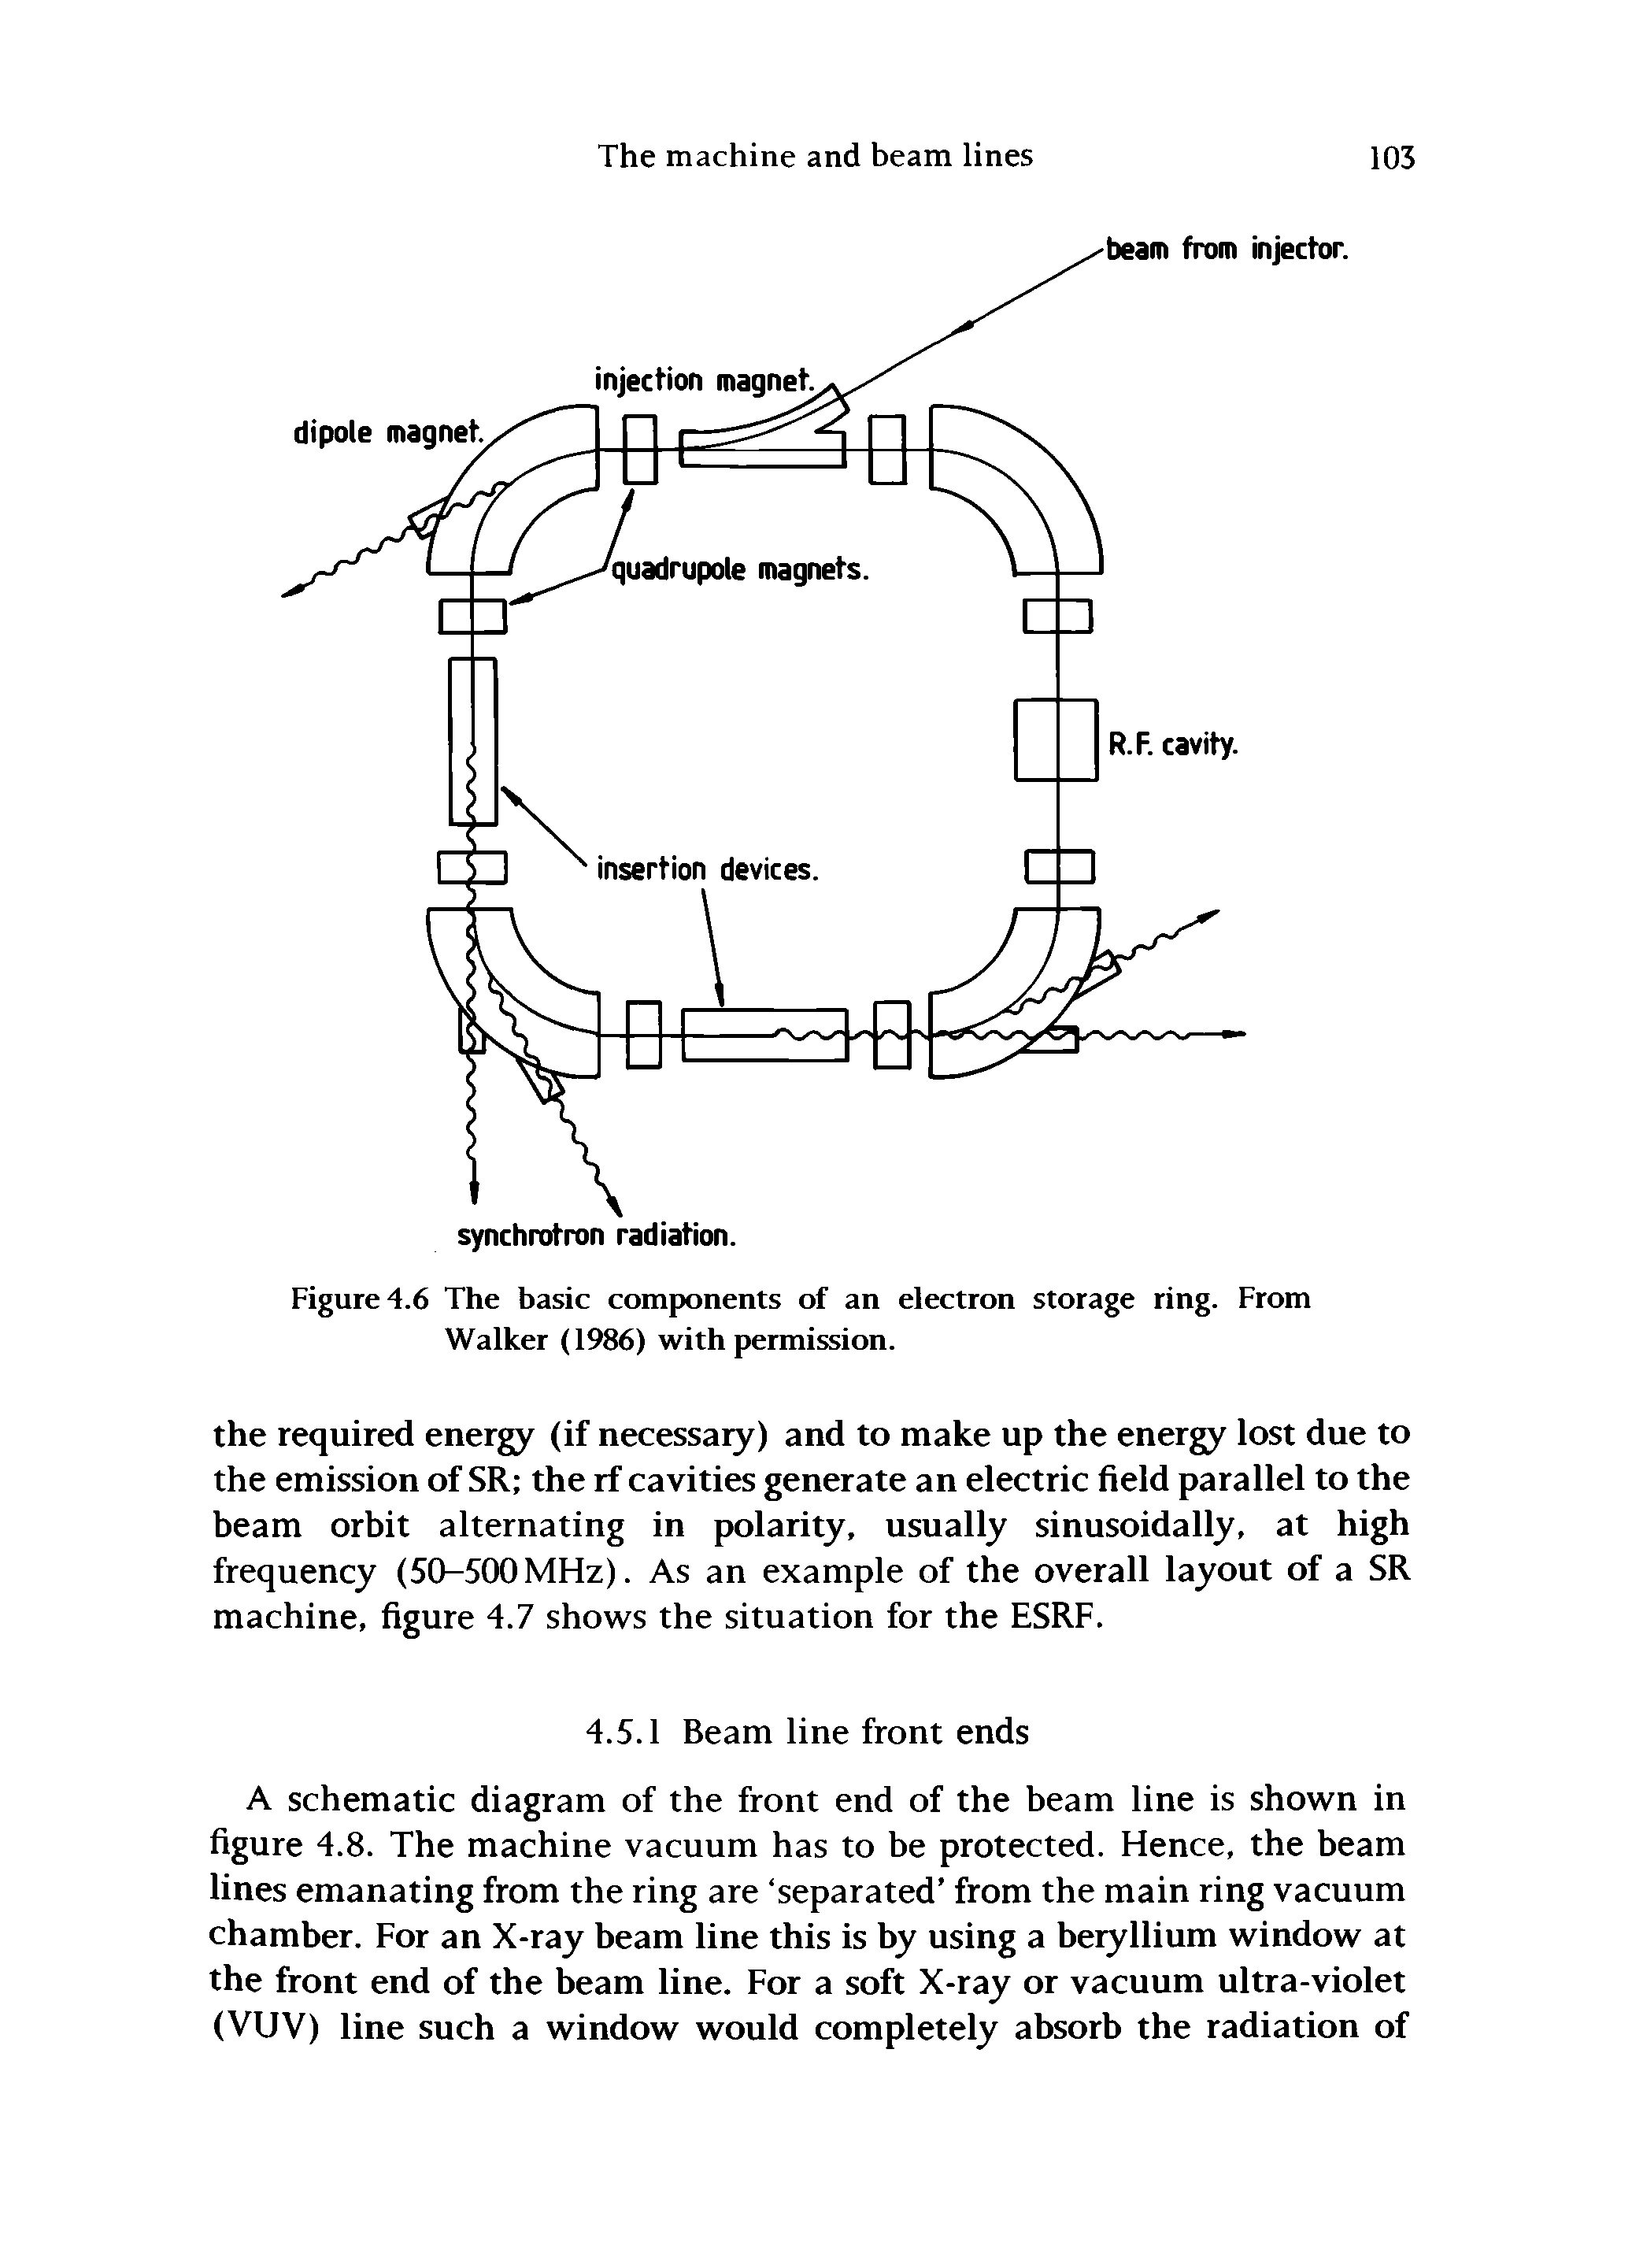 Figure 4.6 The basic components of an electron storage ring. From Walker (1986) with permission.